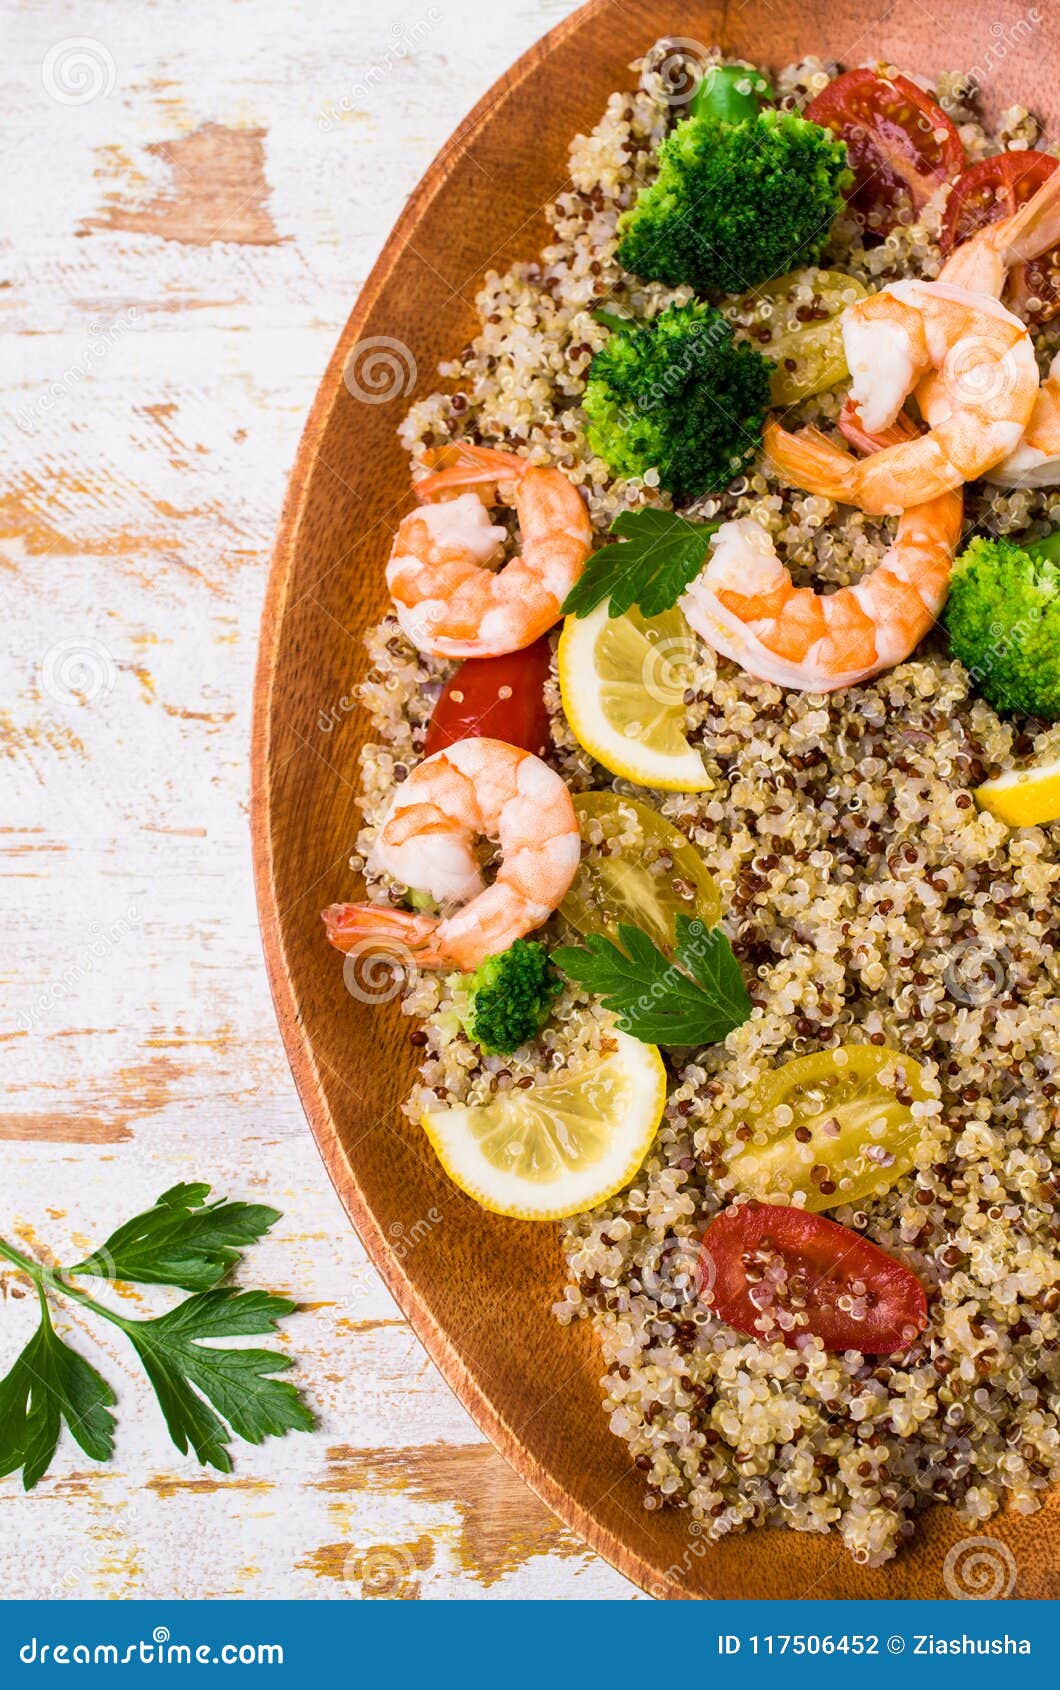 Quinoa Salad with Vegetables Stock Photo - Image of parsley, fork ...